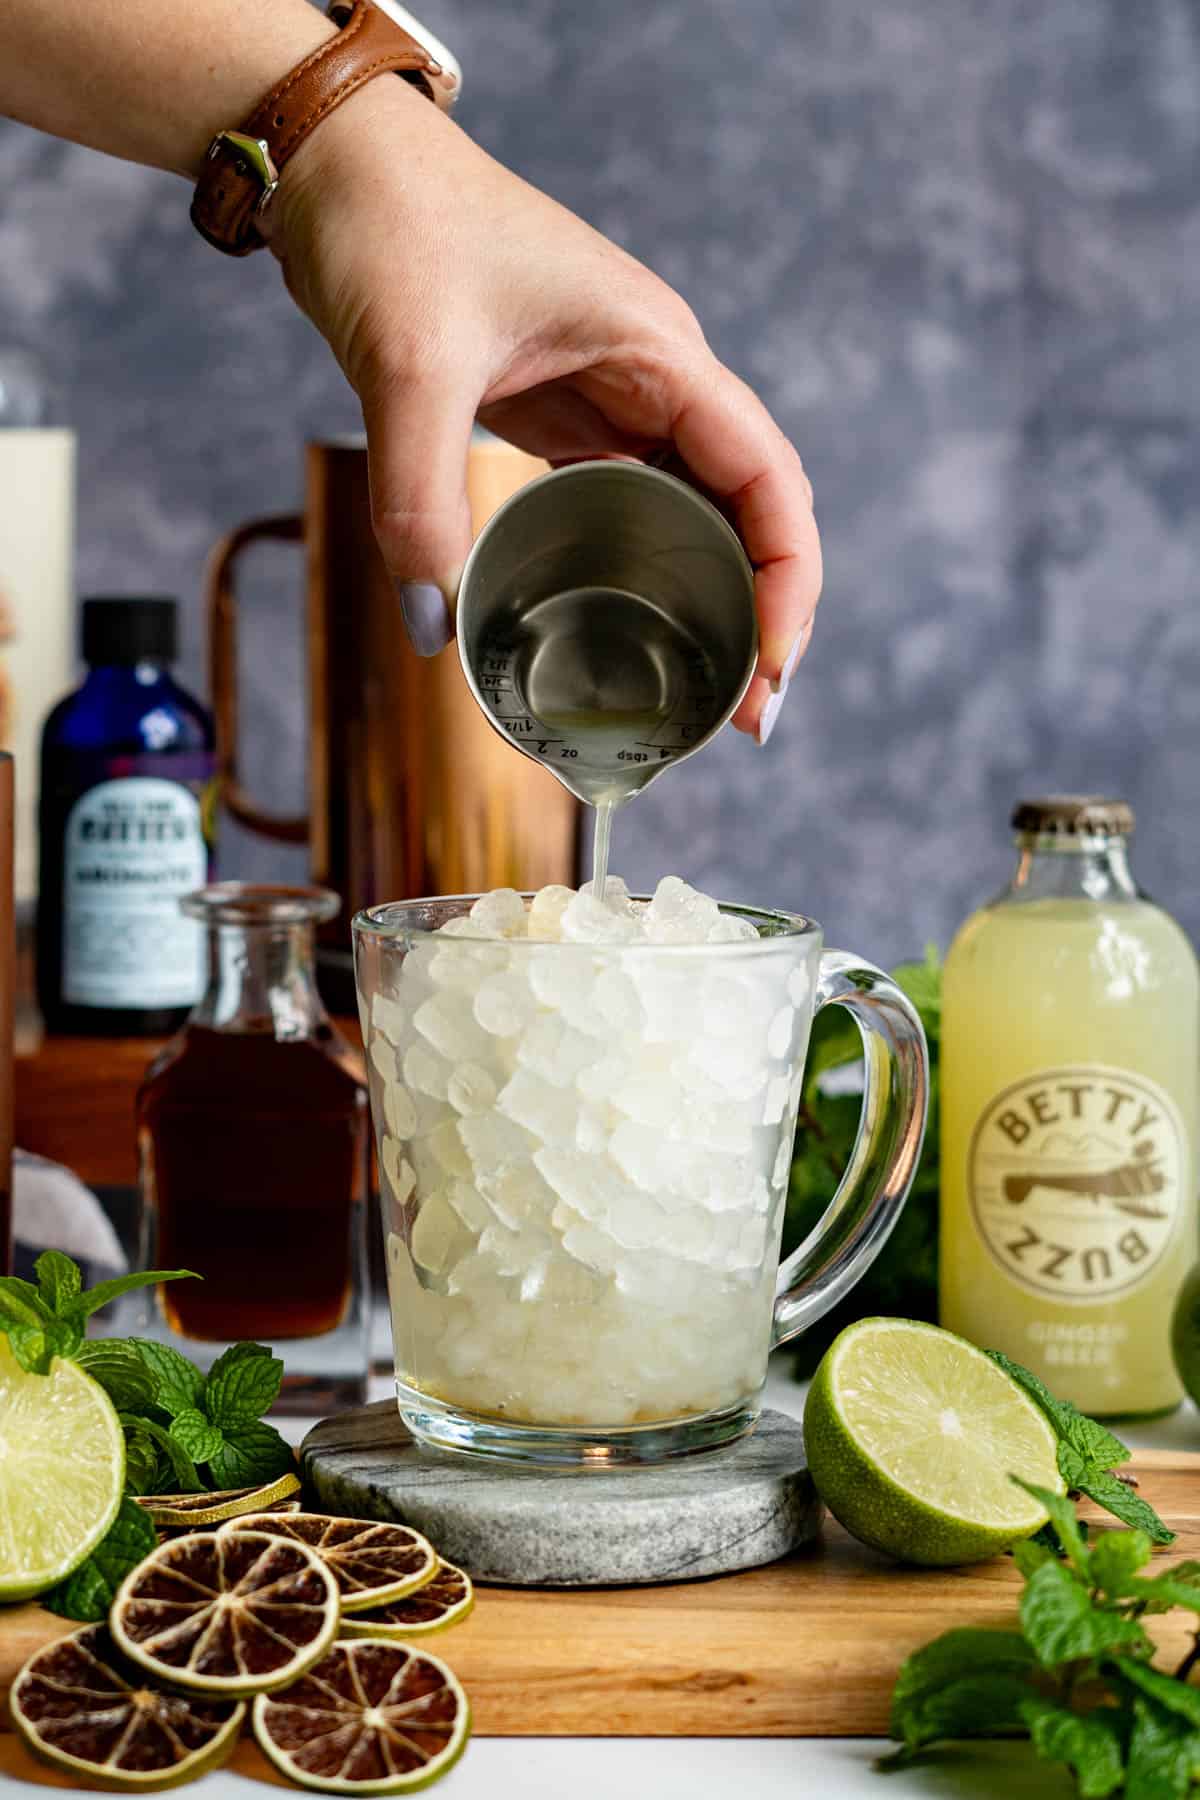 A hand from out of frame is pouring lime juice into a glass mug filled with ice.